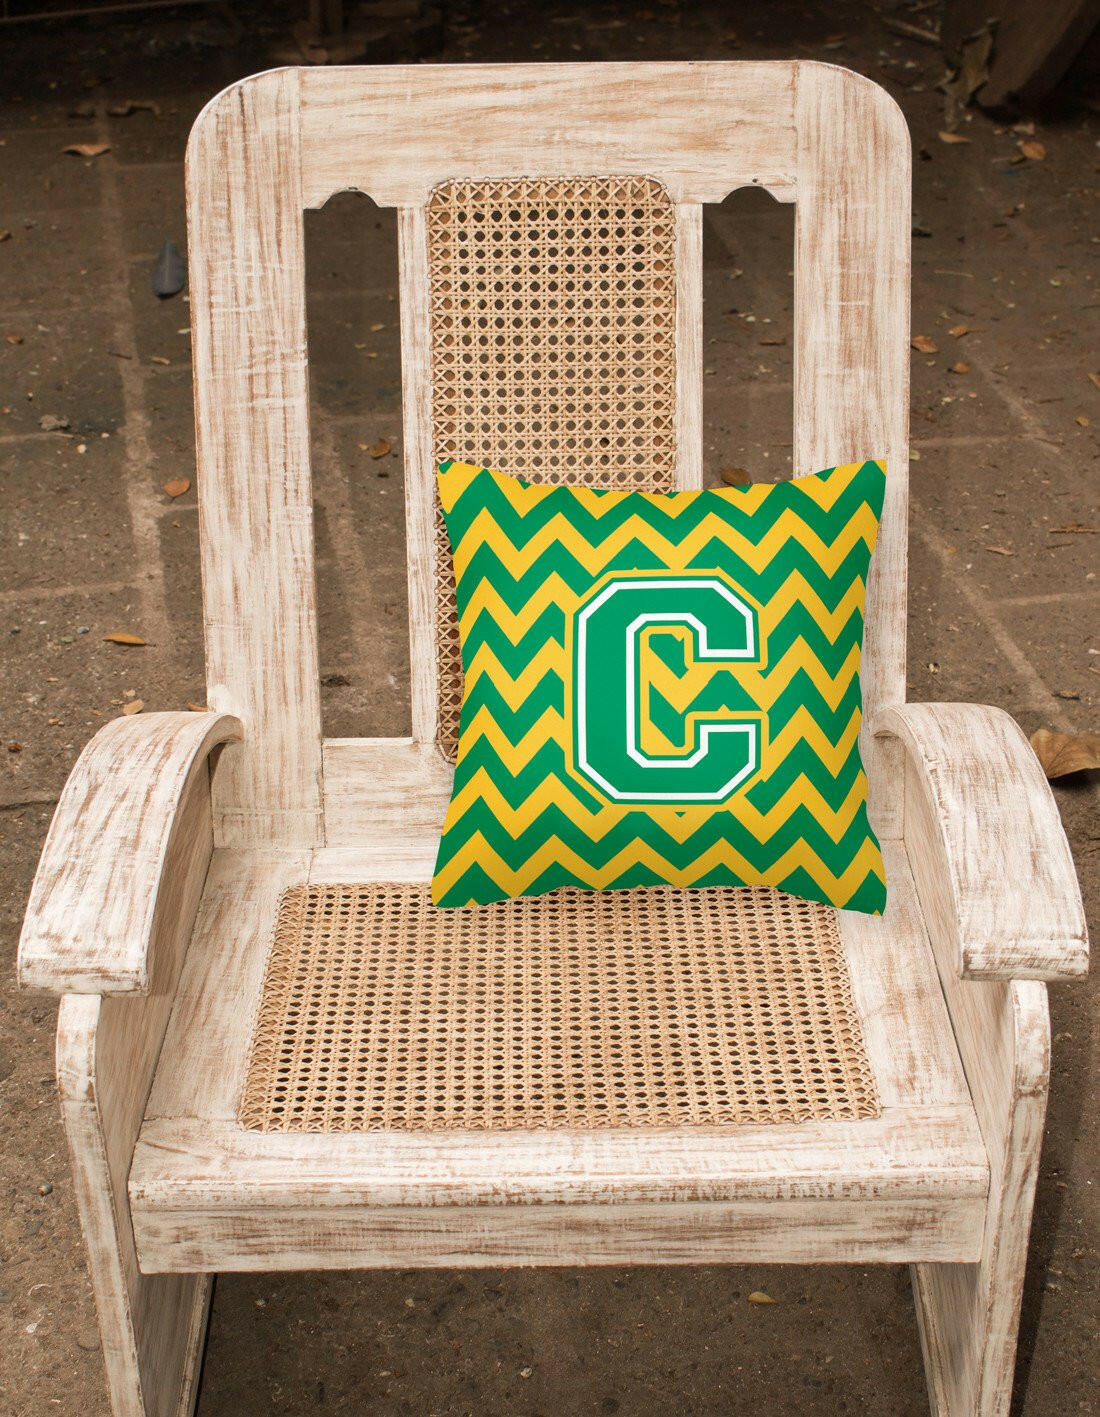 Letter C Chevron Green and Gold Fabric Decorative Pillow CJ1059-CPW1414 by Caroline's Treasures